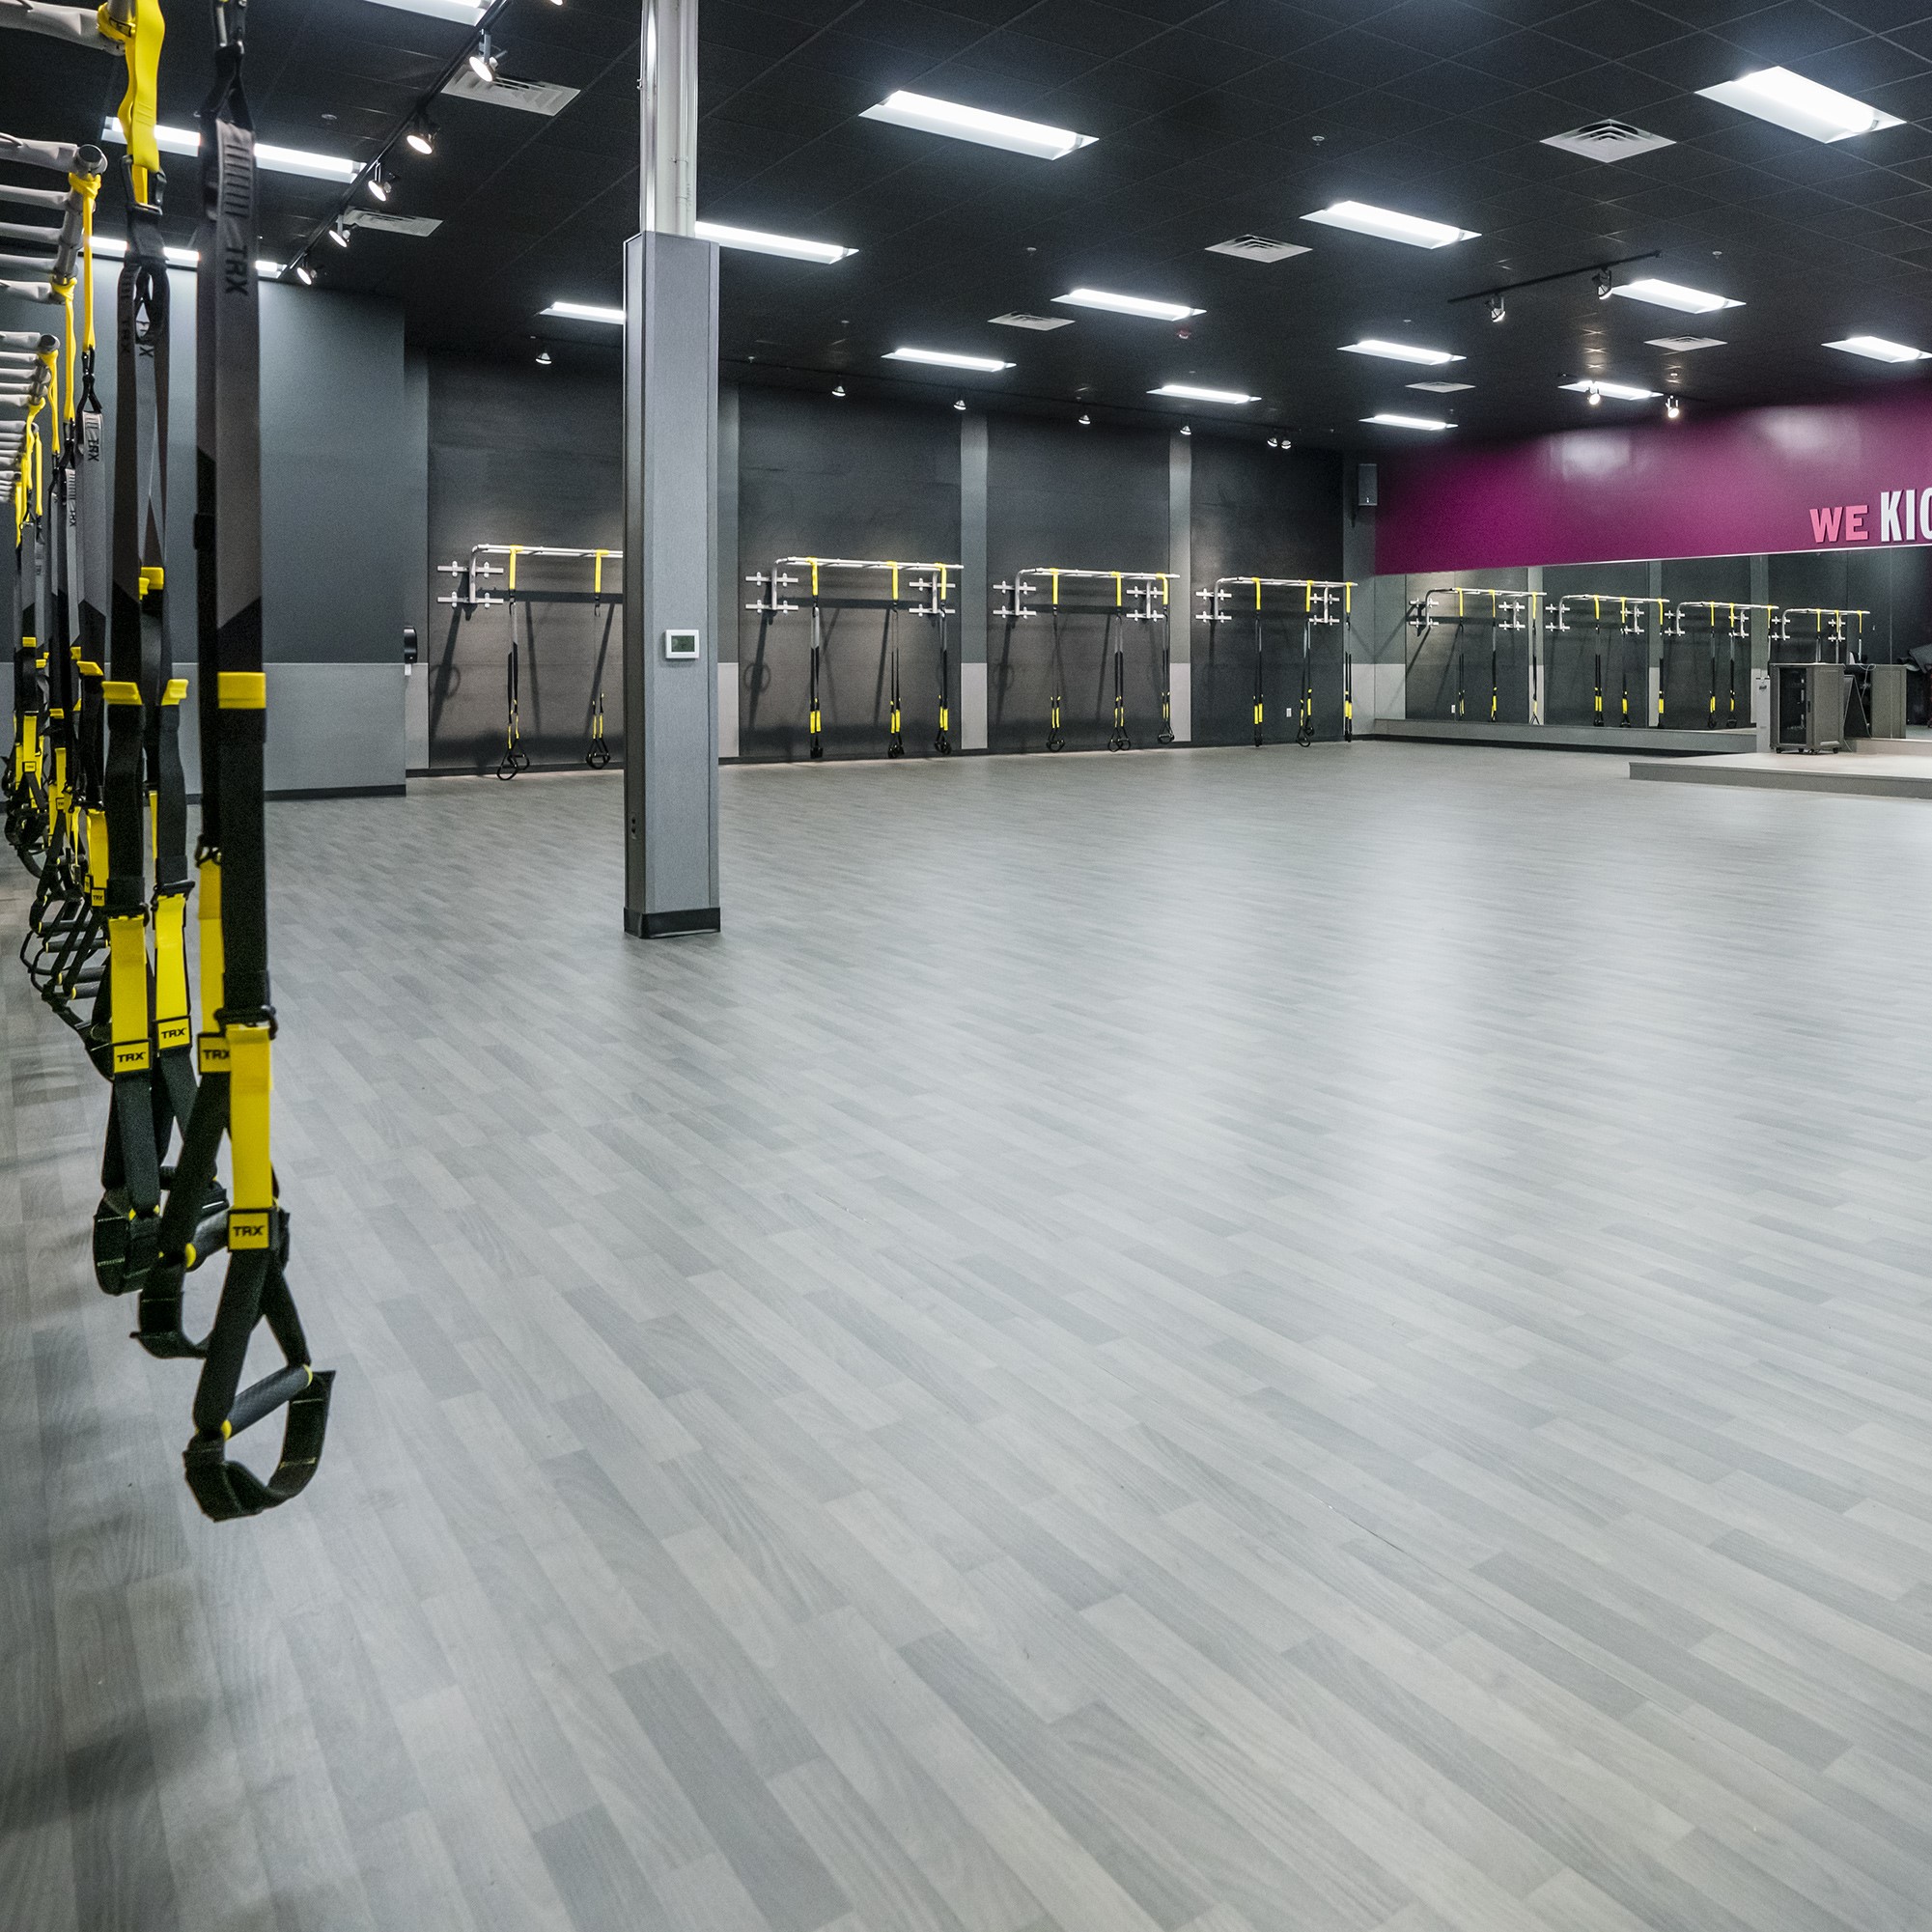 A large workout area at Crunch Fitness.